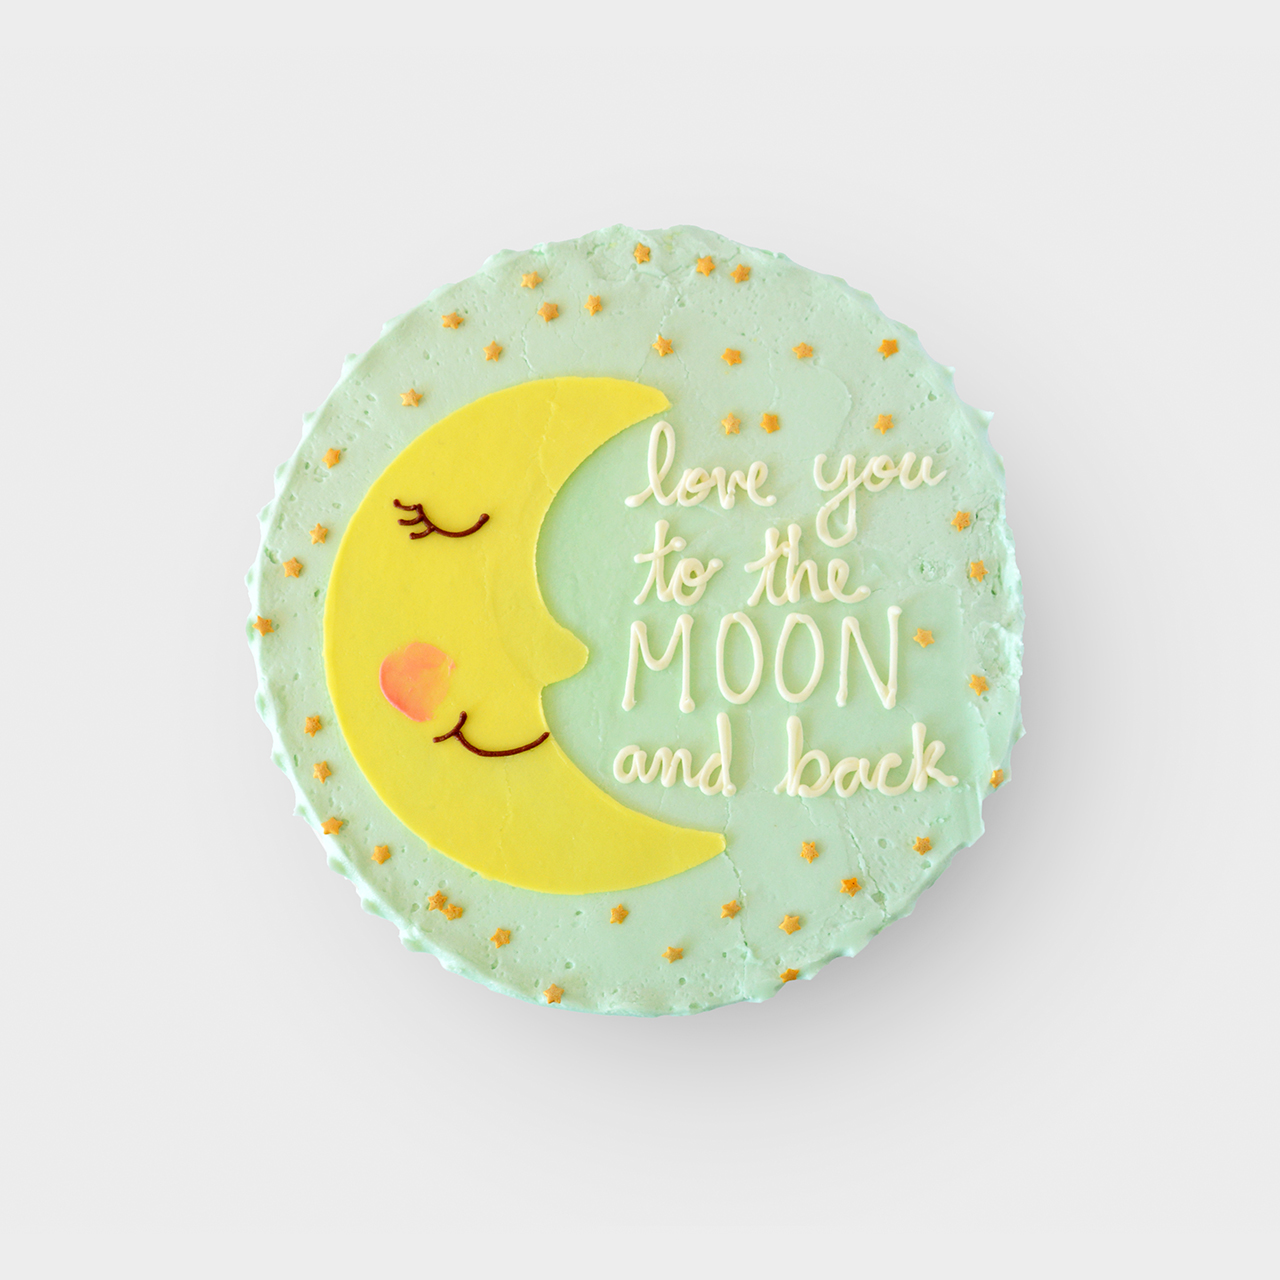 Baby Moon decorated cake 